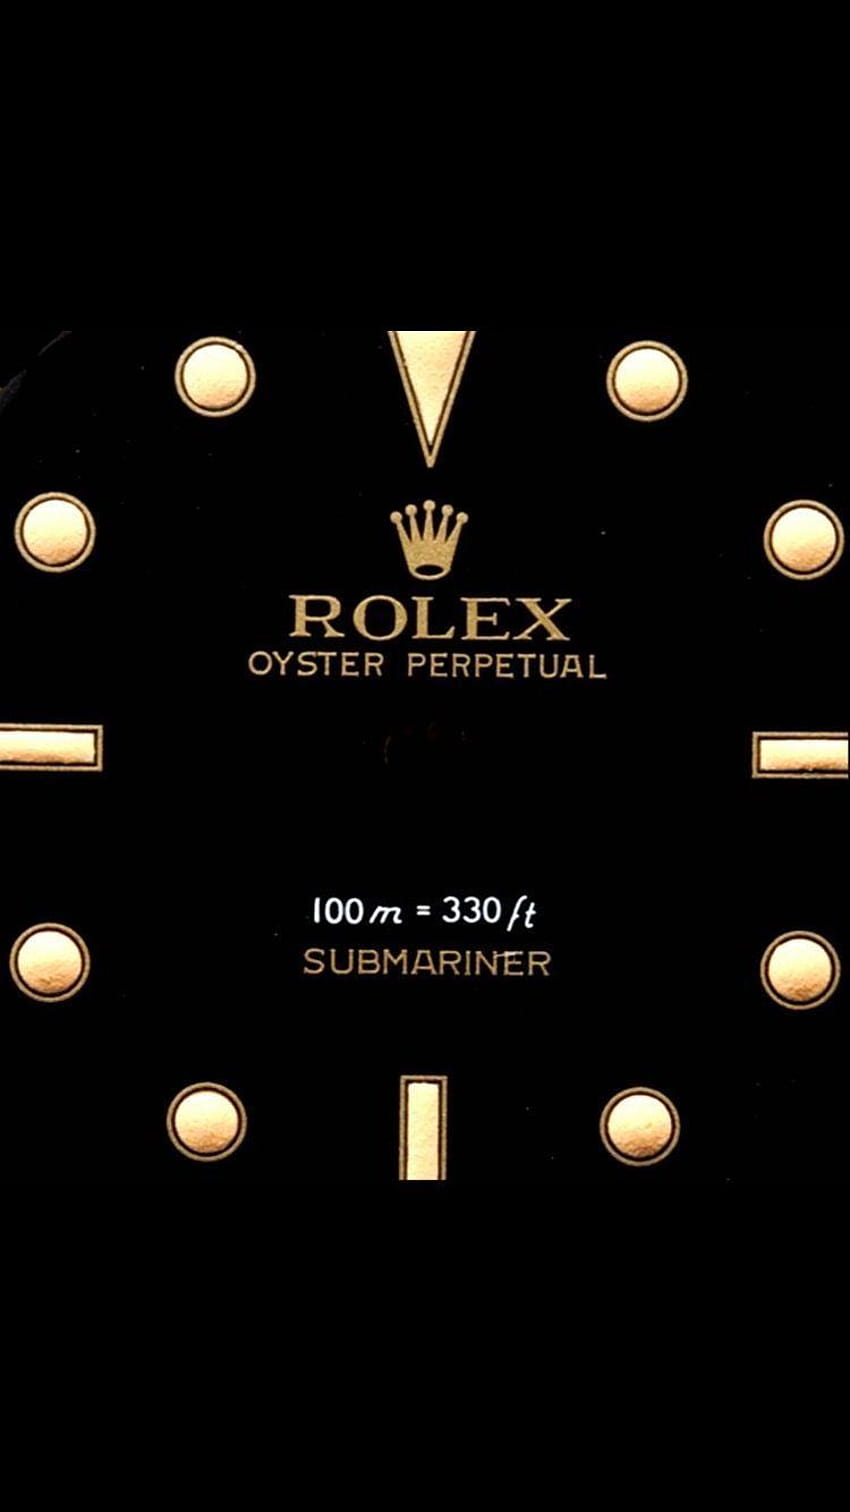 141 Rolex Logo Stock Video Footage - 4K and HD Video Clips | Shutterstock